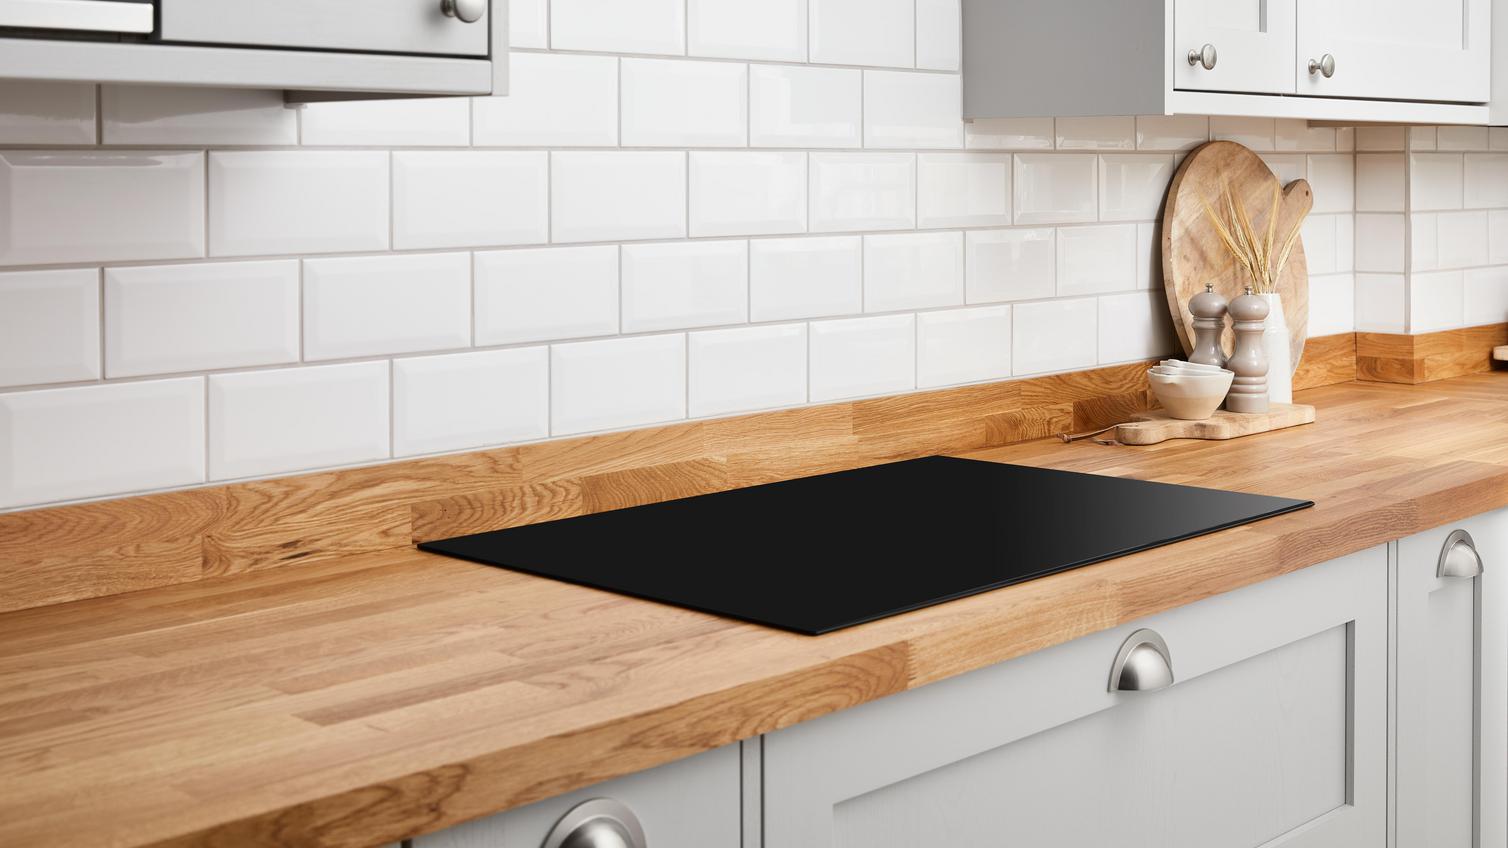 An induction hob set into a Howdens timber worktop